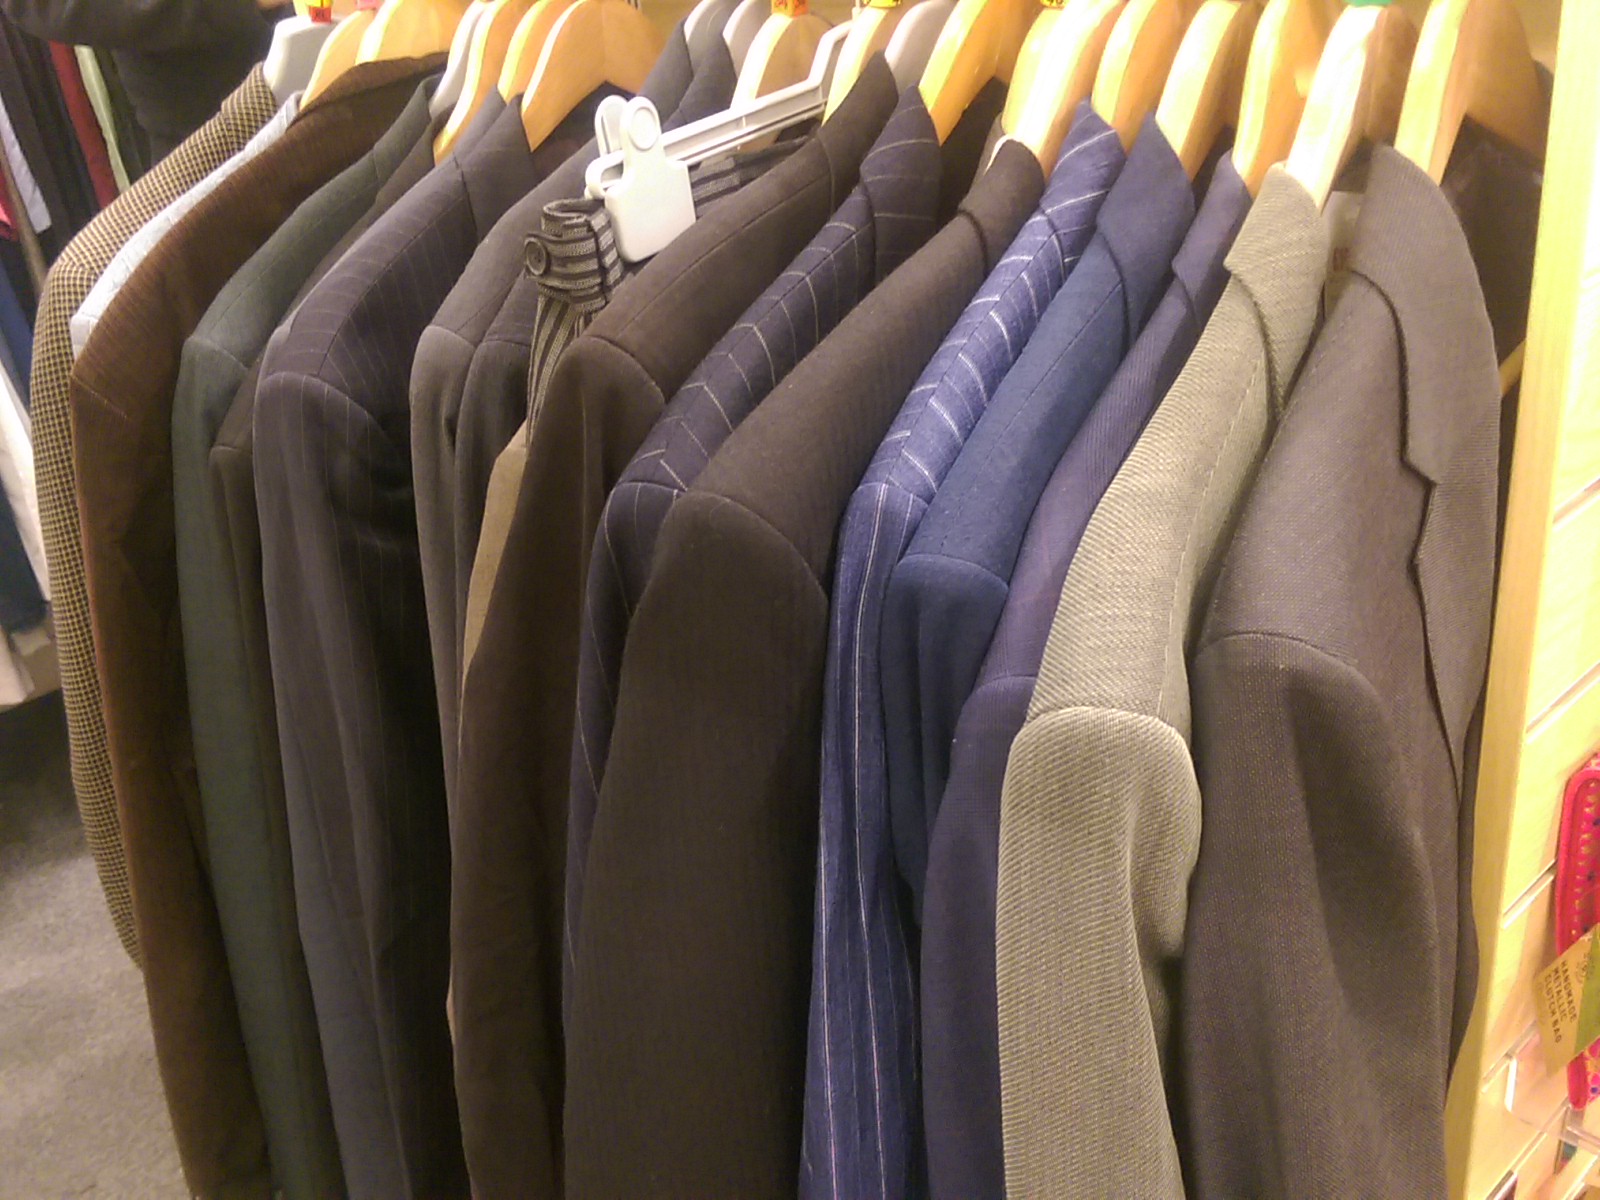 A rack of suit jackets in a shop